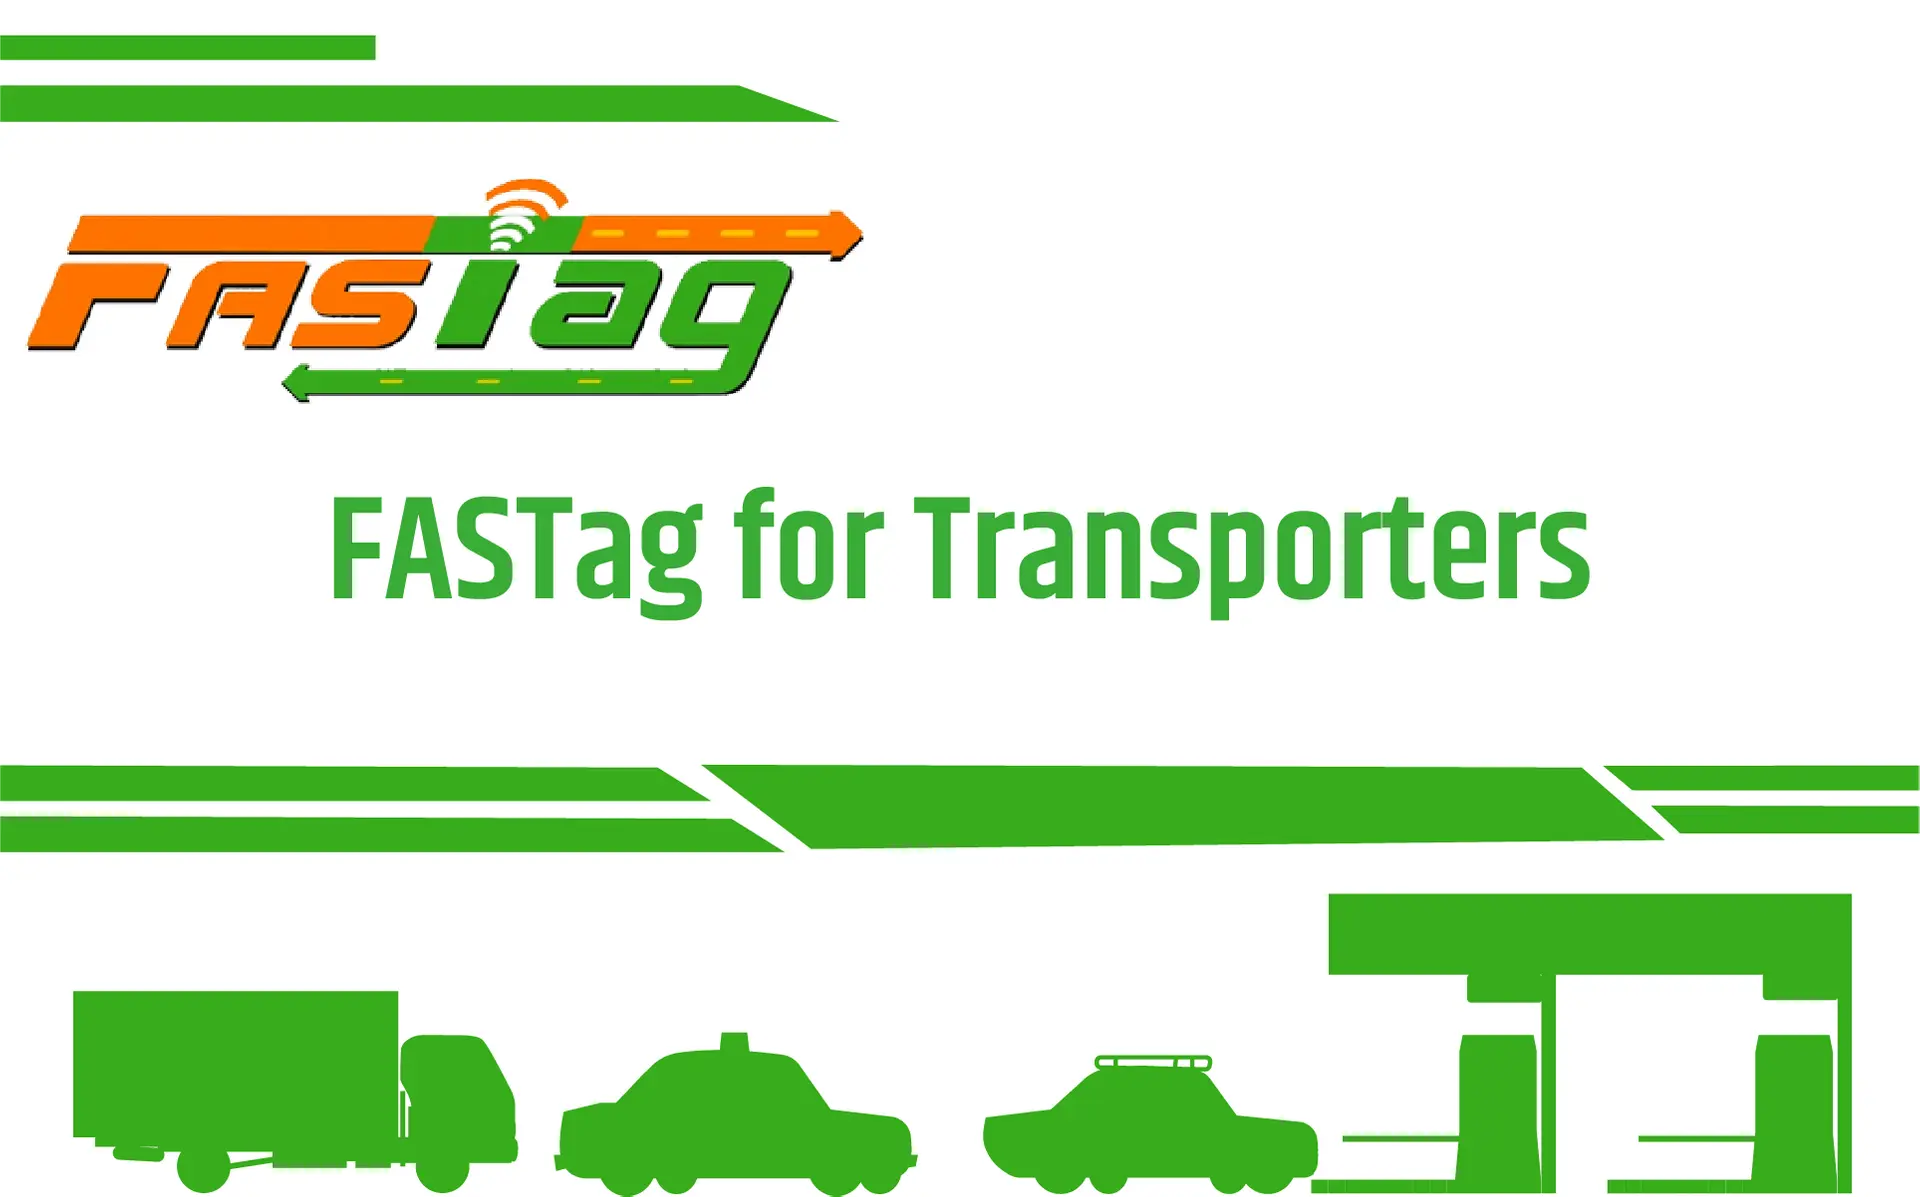 Why Is FASTag Important for Transporters?